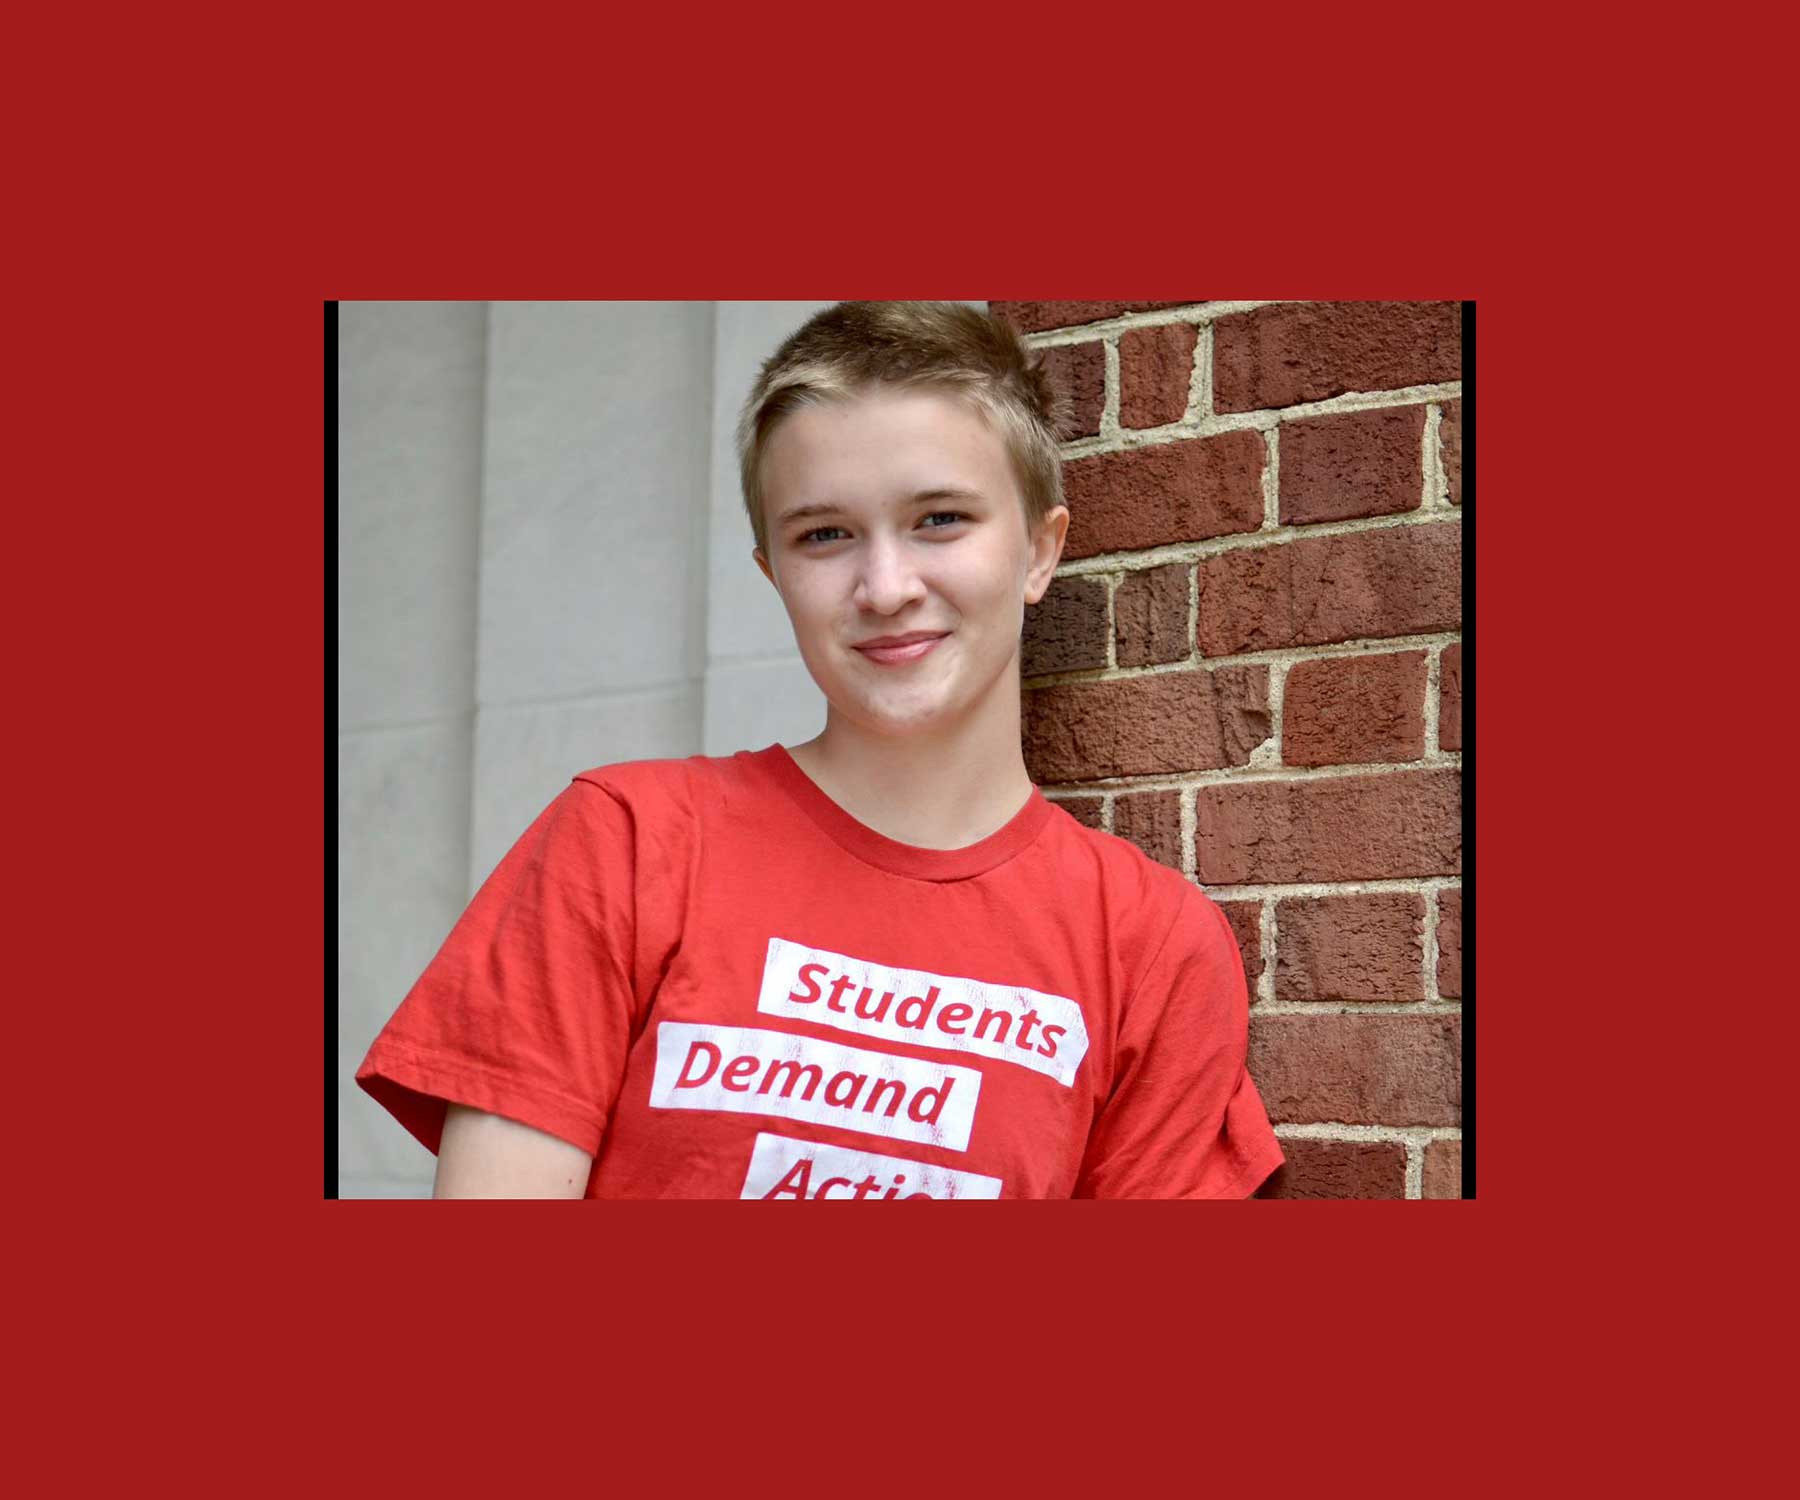 Student Peren Tiemann stands in front of a brick wall. They have short blond hair and are wearing a read t-shirt which reads students demand action